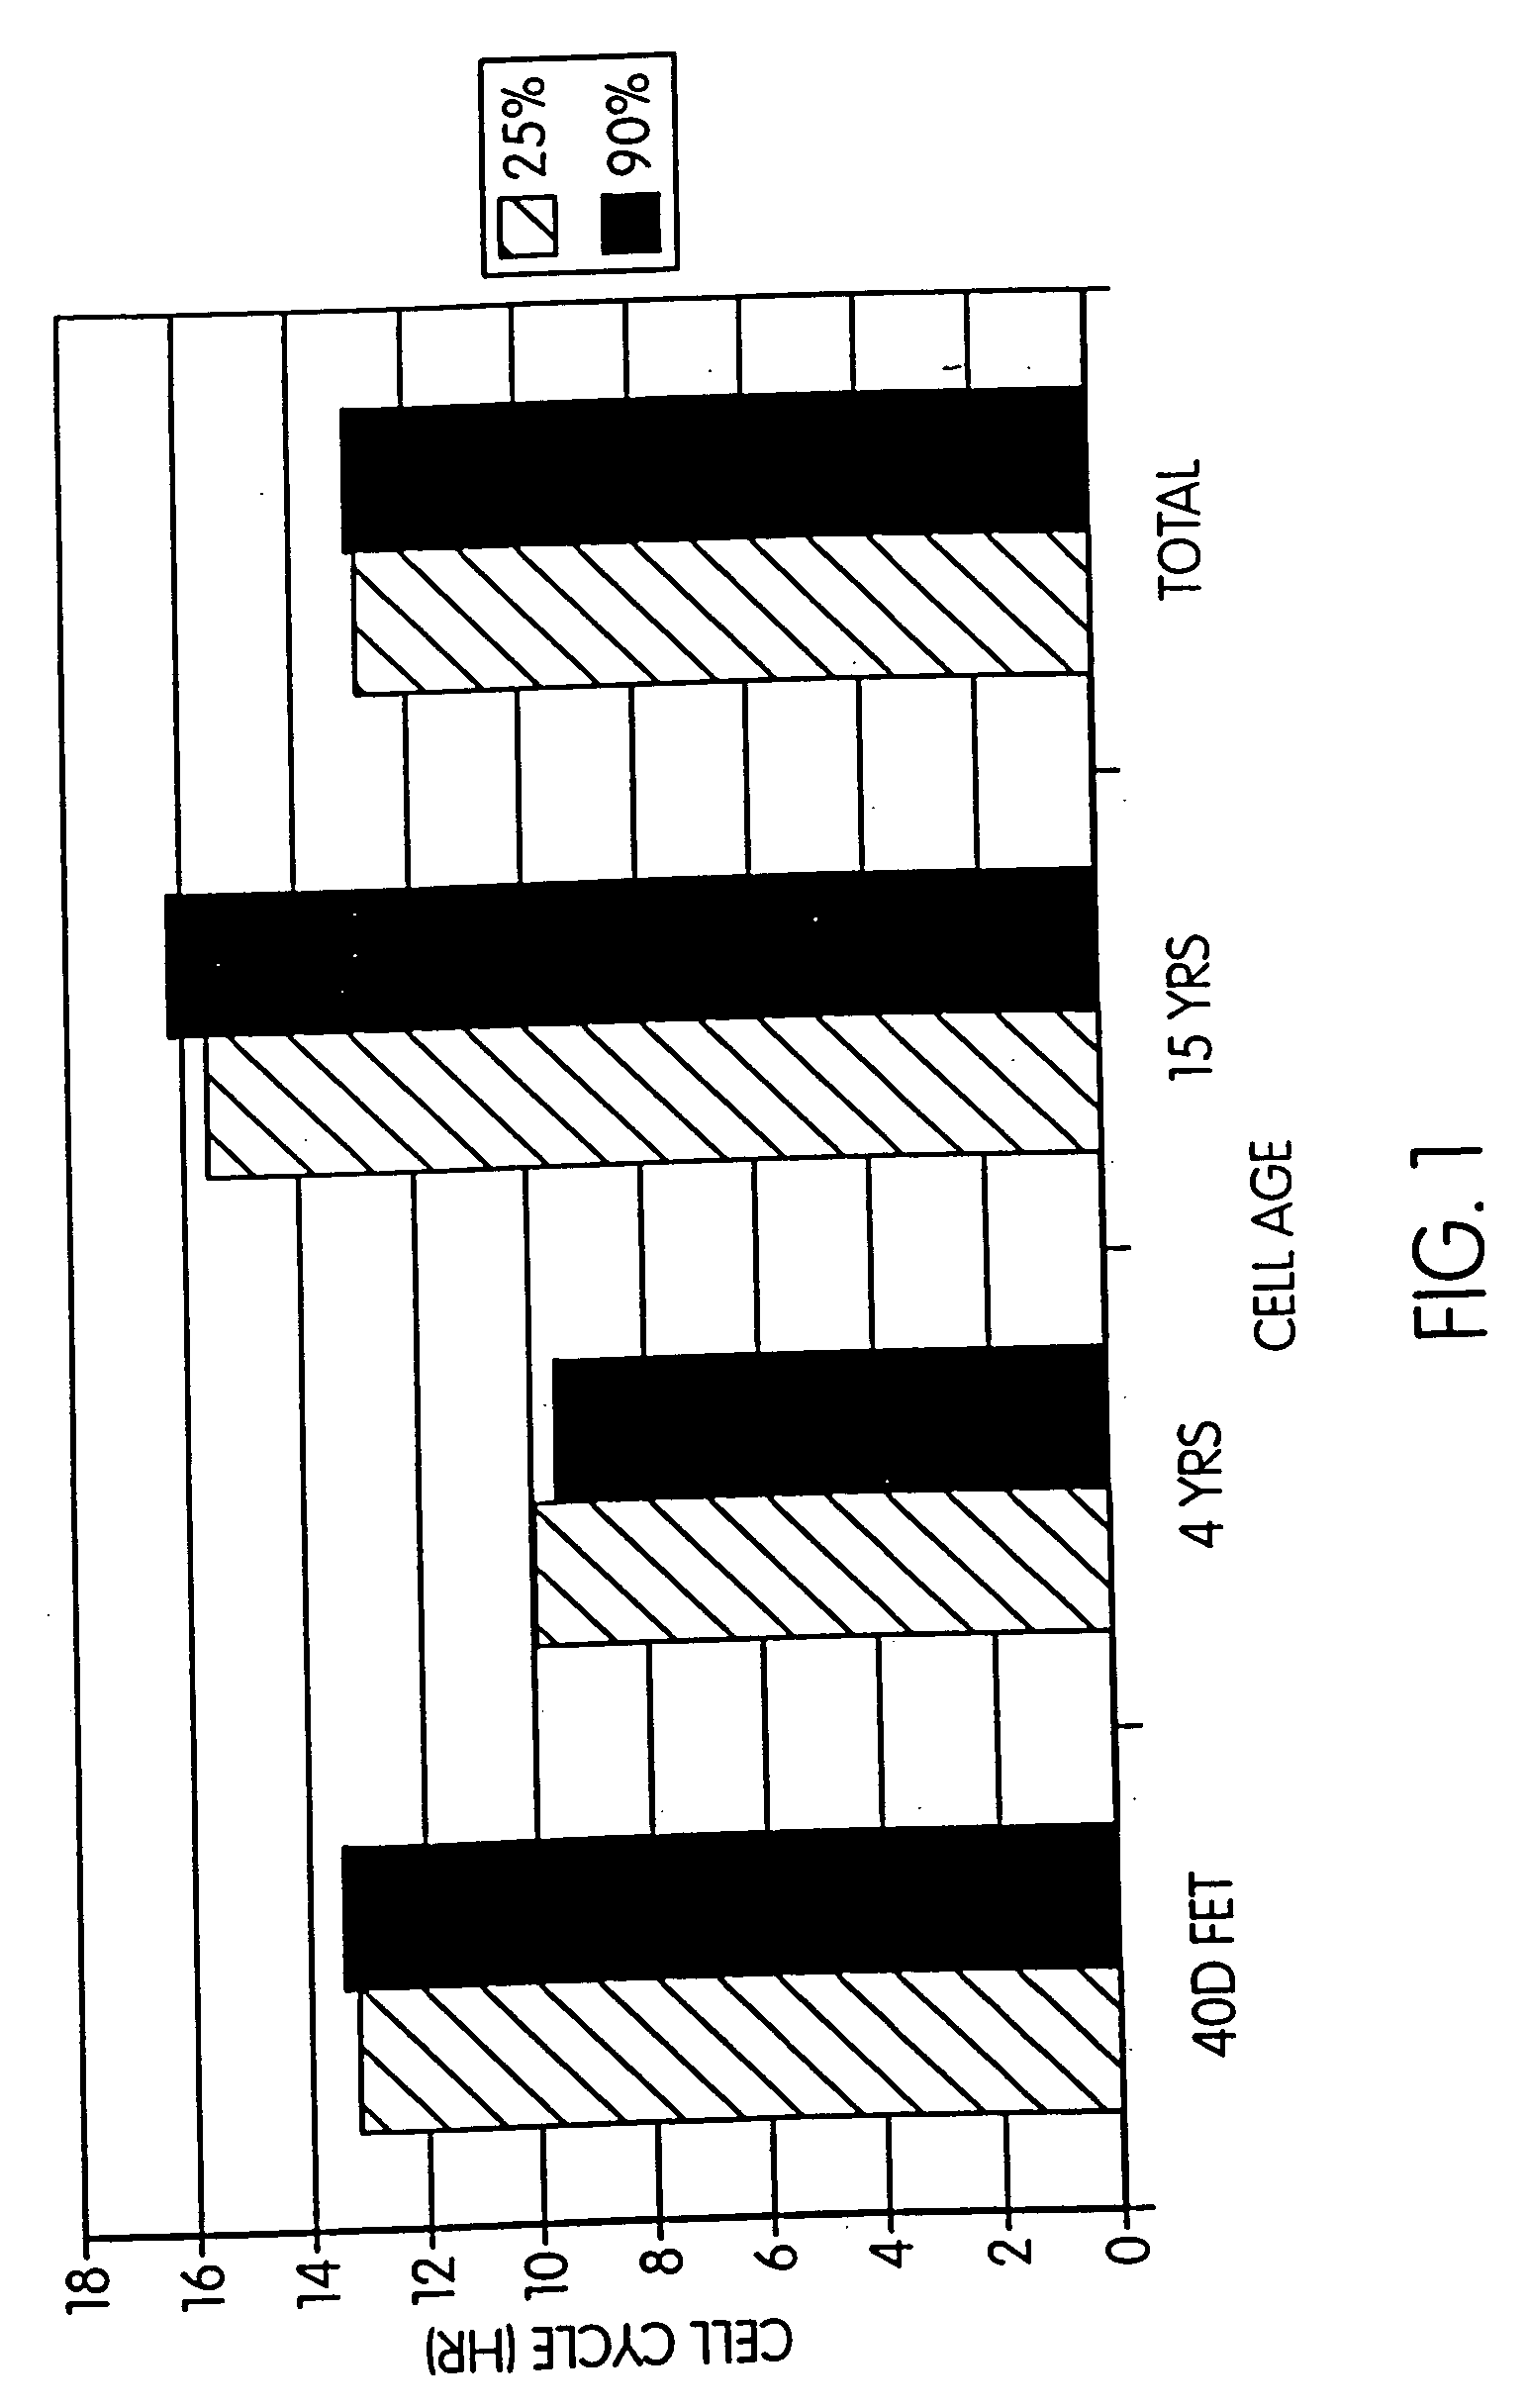 Preparation and selection of donor cells for nuclear transplantation